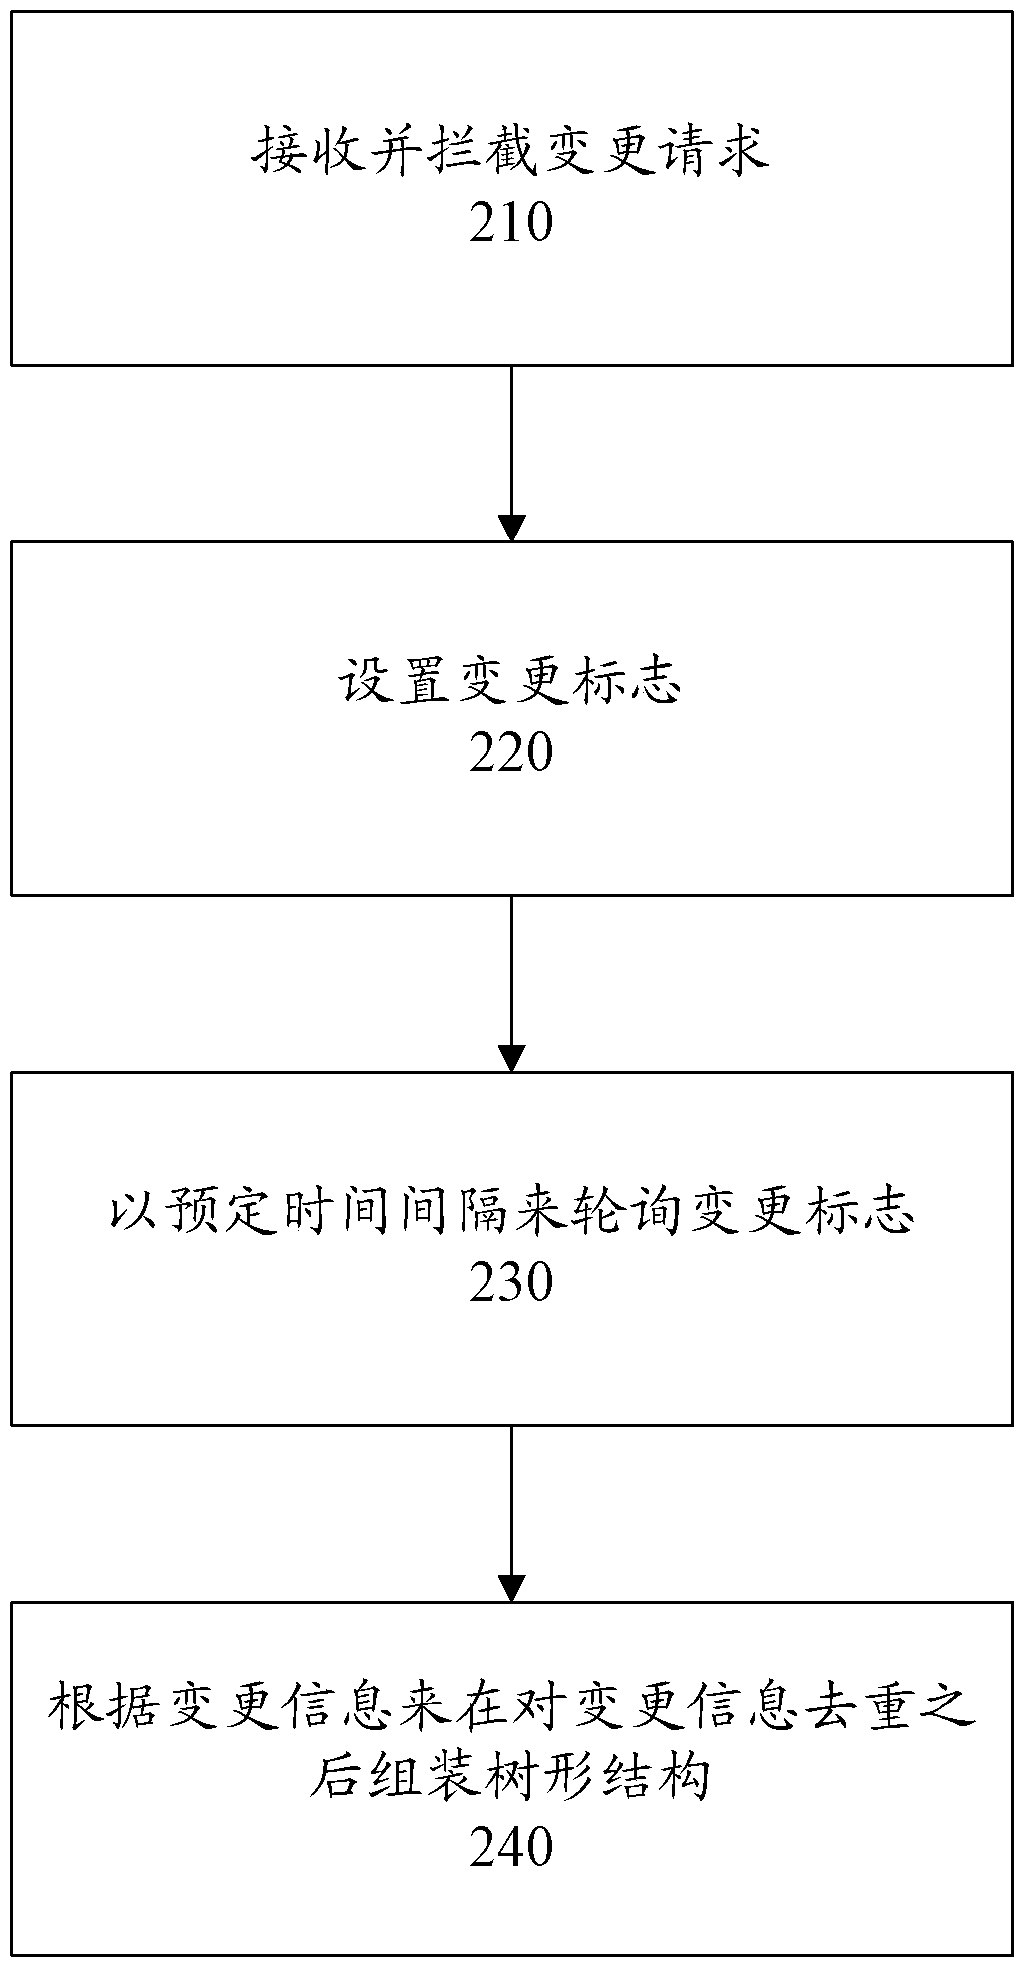 Method and system for maintaining tree-based directory relationships